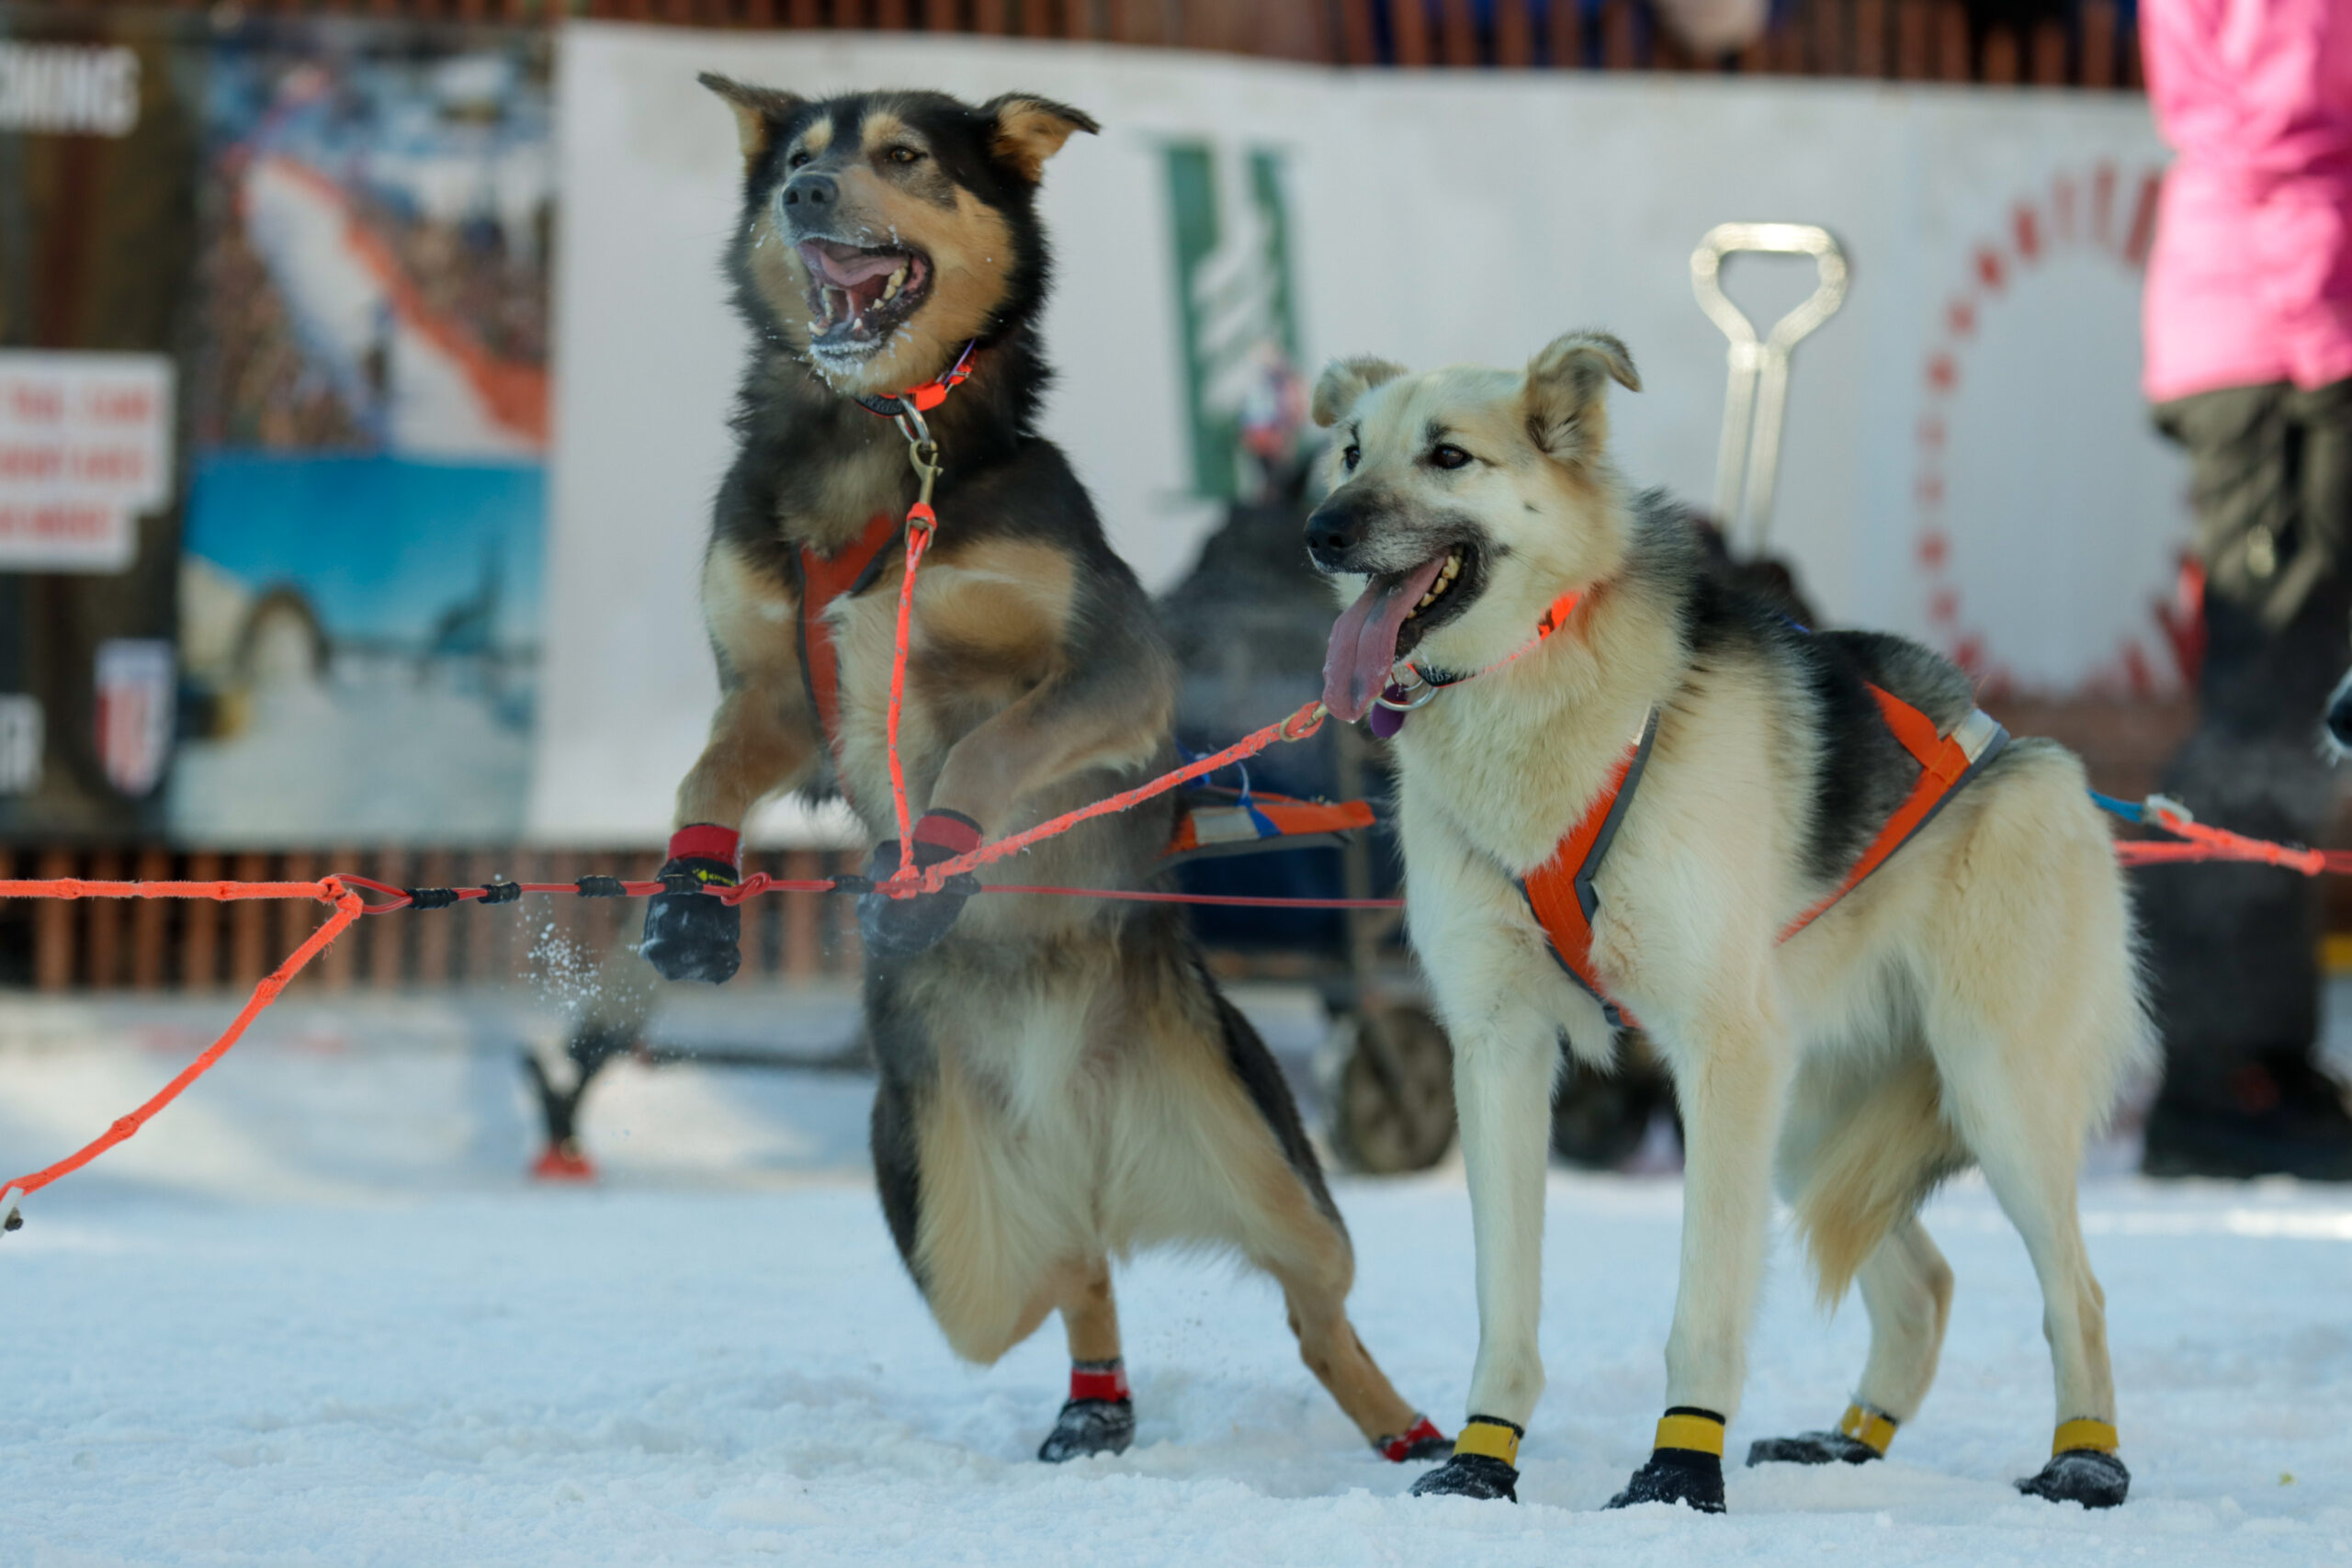 Two dogs panting and lunging on a harness.